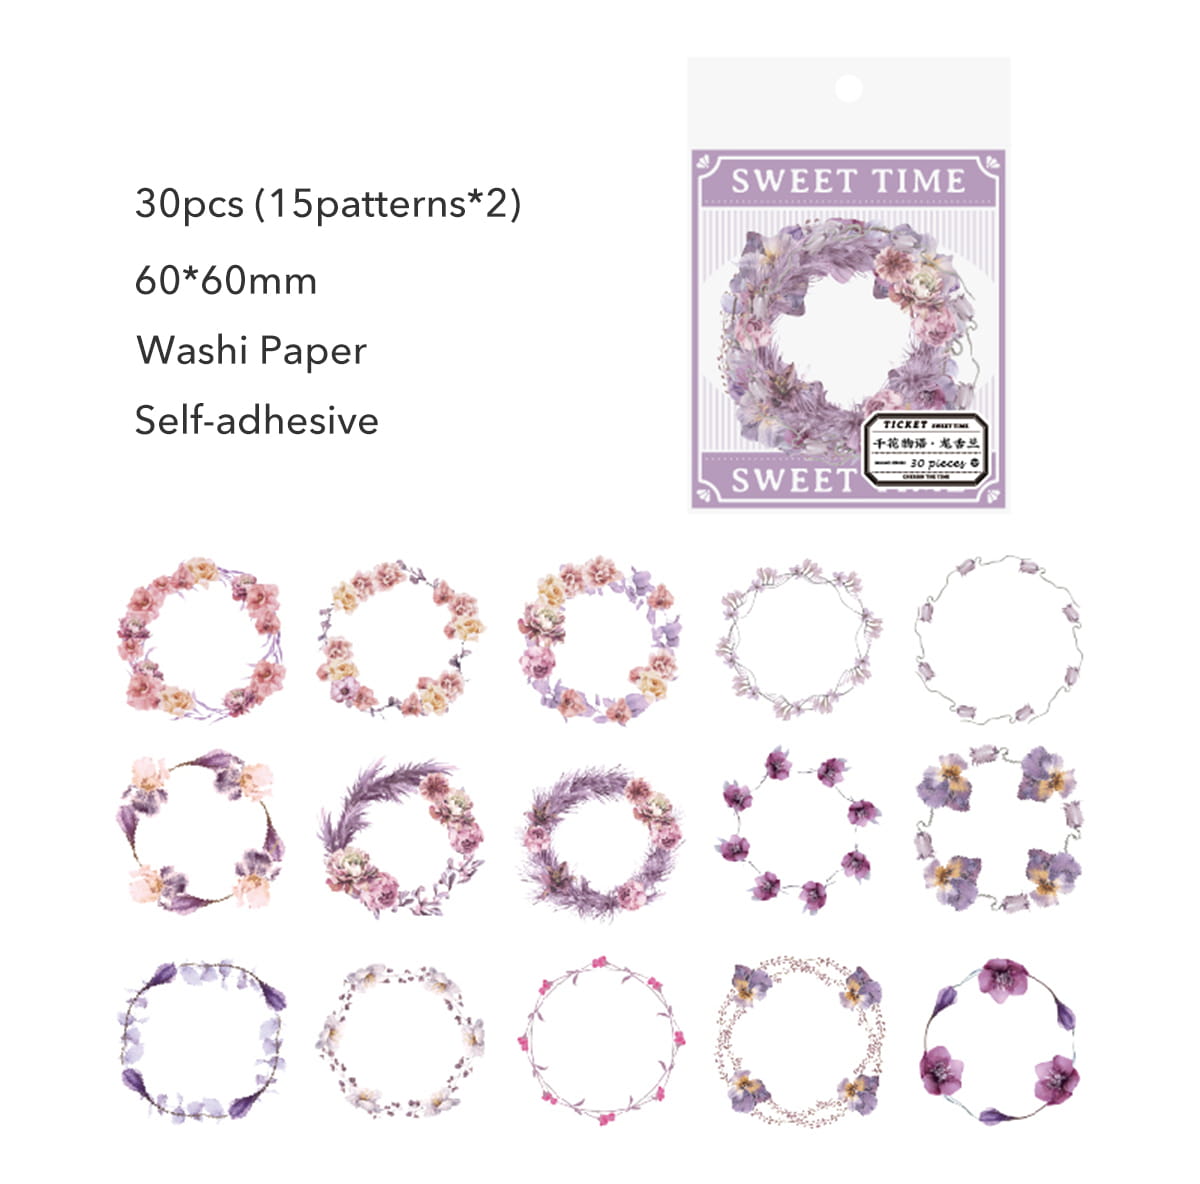 30 PCS Sweet Time Floral Stickers Pack